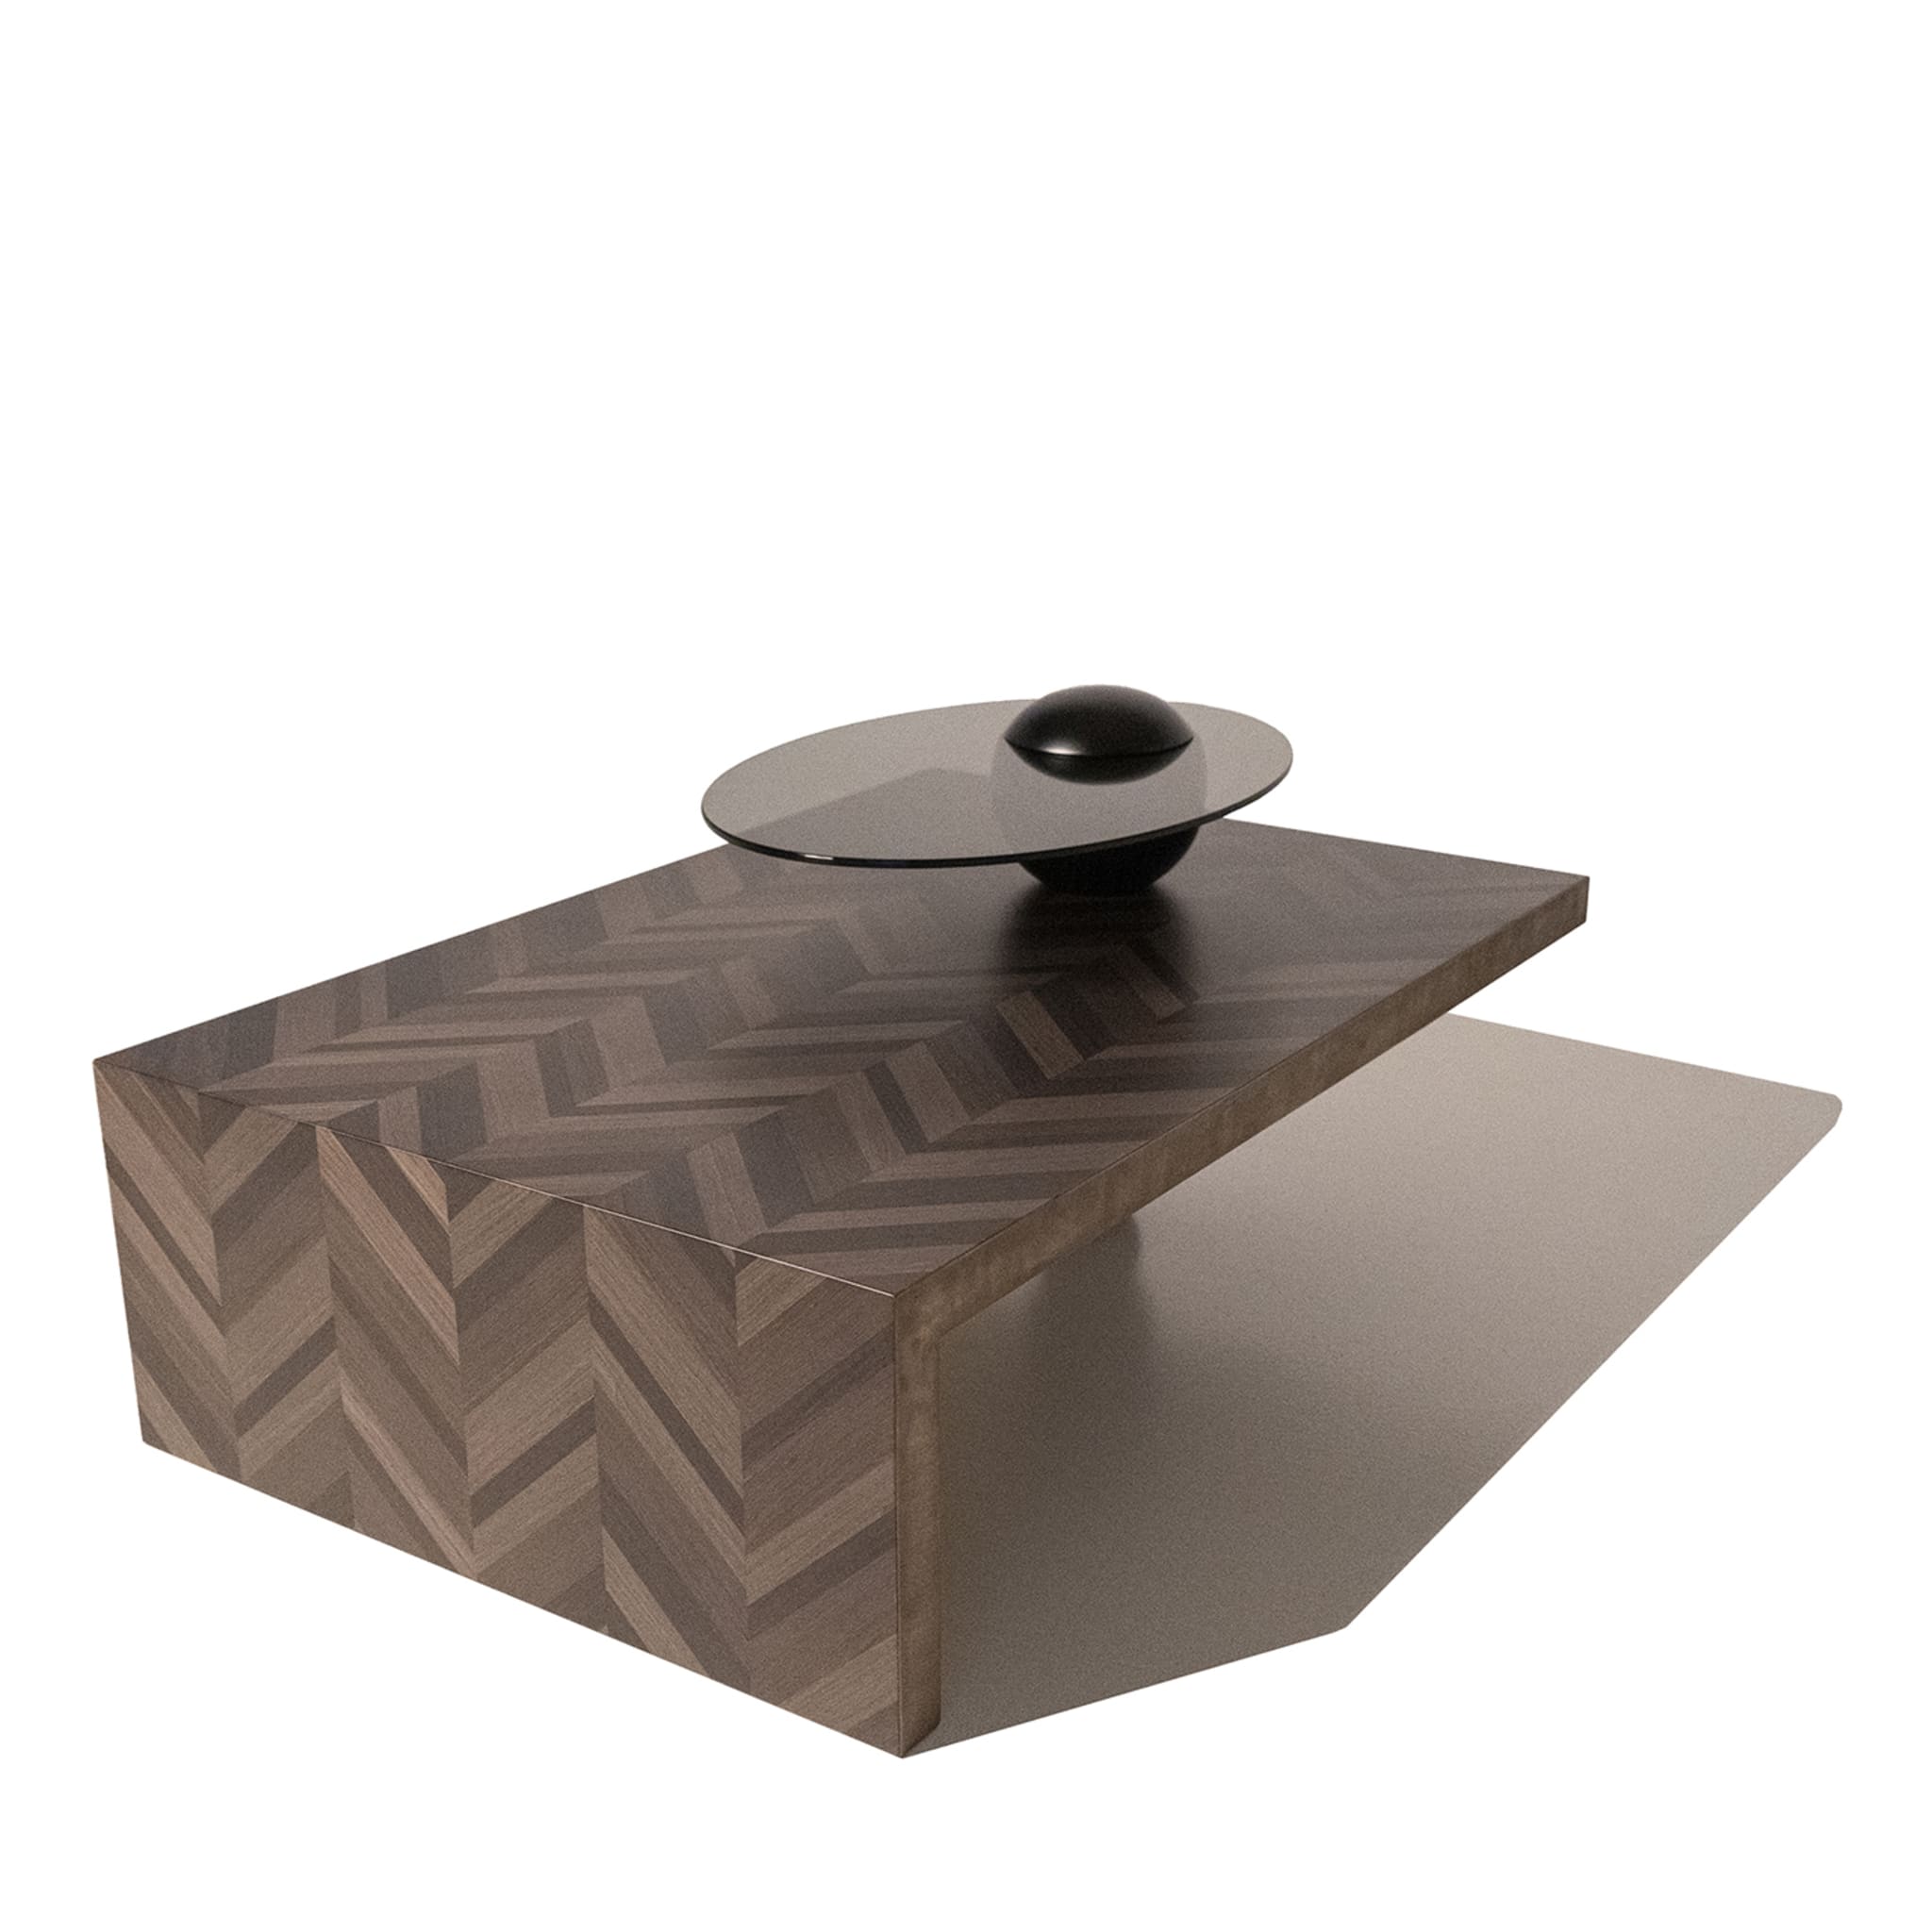 Saturno Coffee Table by Marco and Giulio Mantellassi - Main view